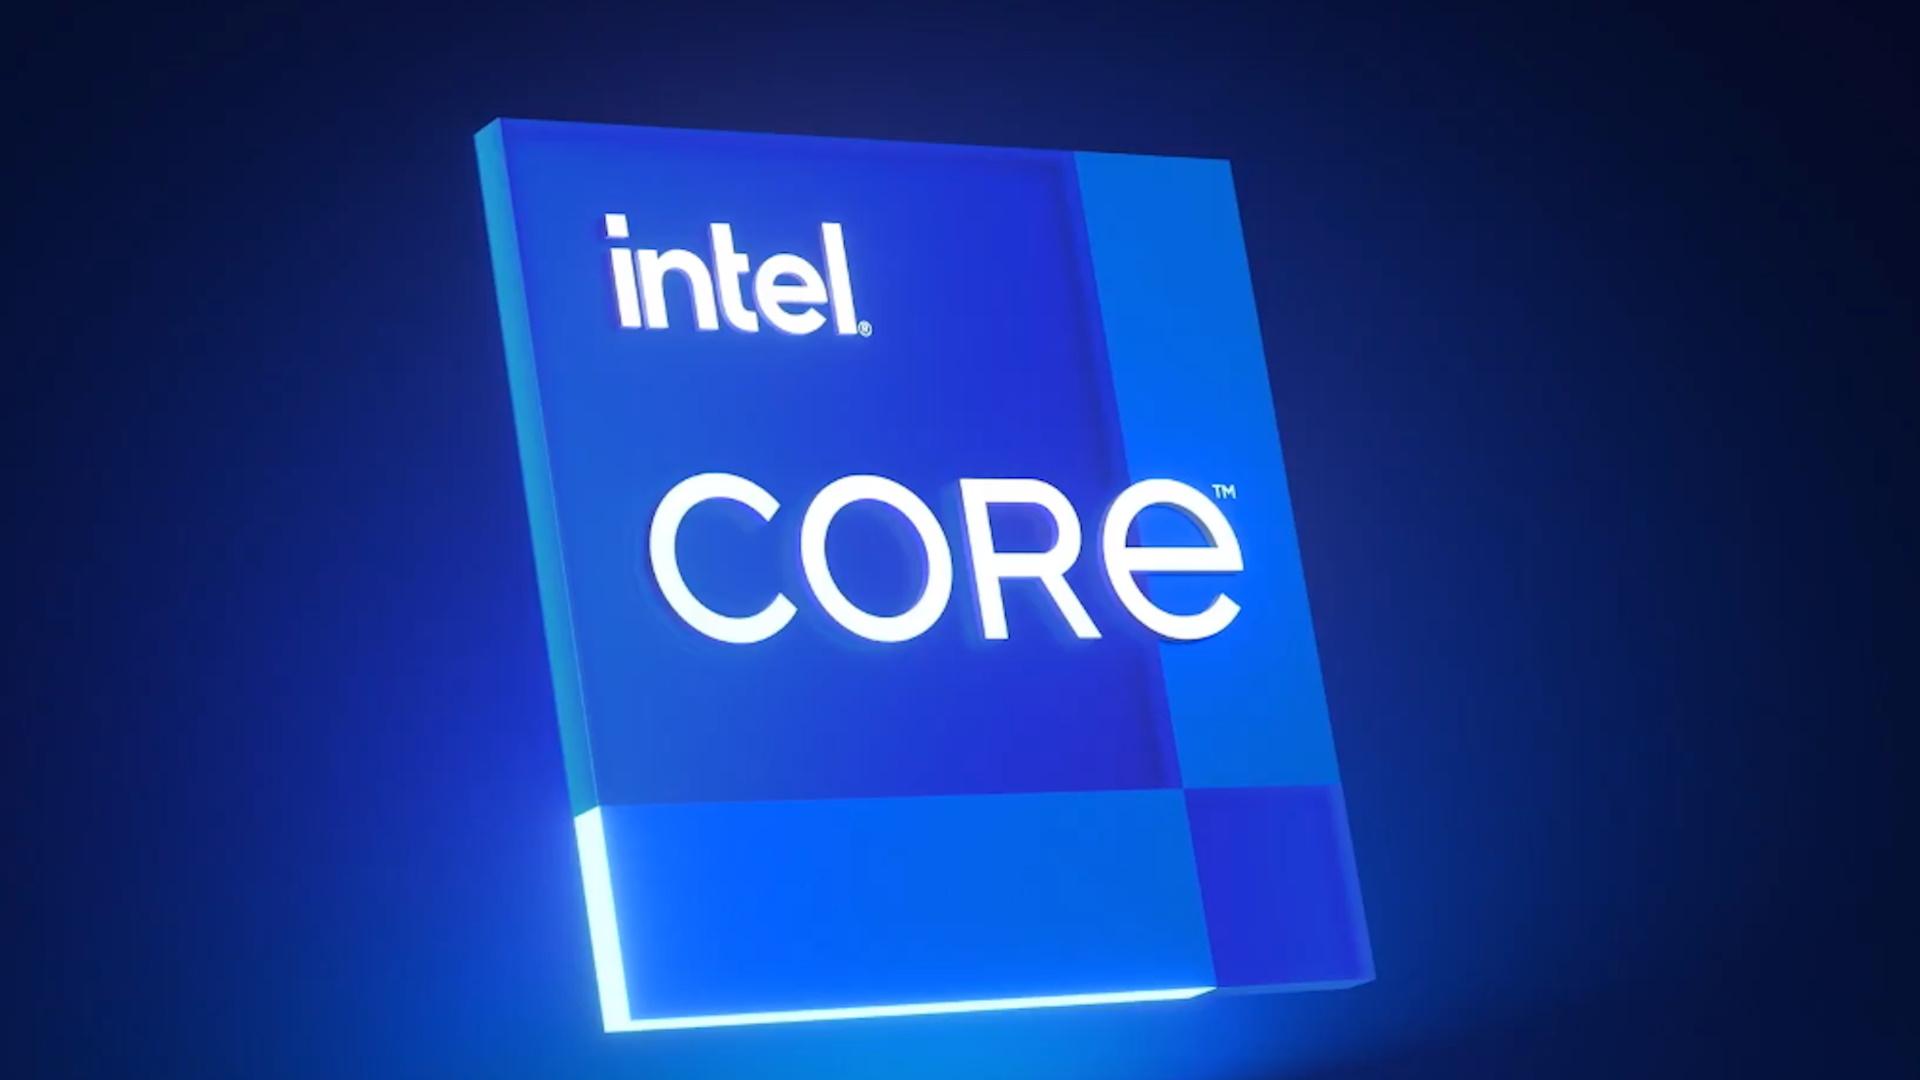 Despite modest improvements, the price of the 14th generation Intel Core appears to be increasing significantly.